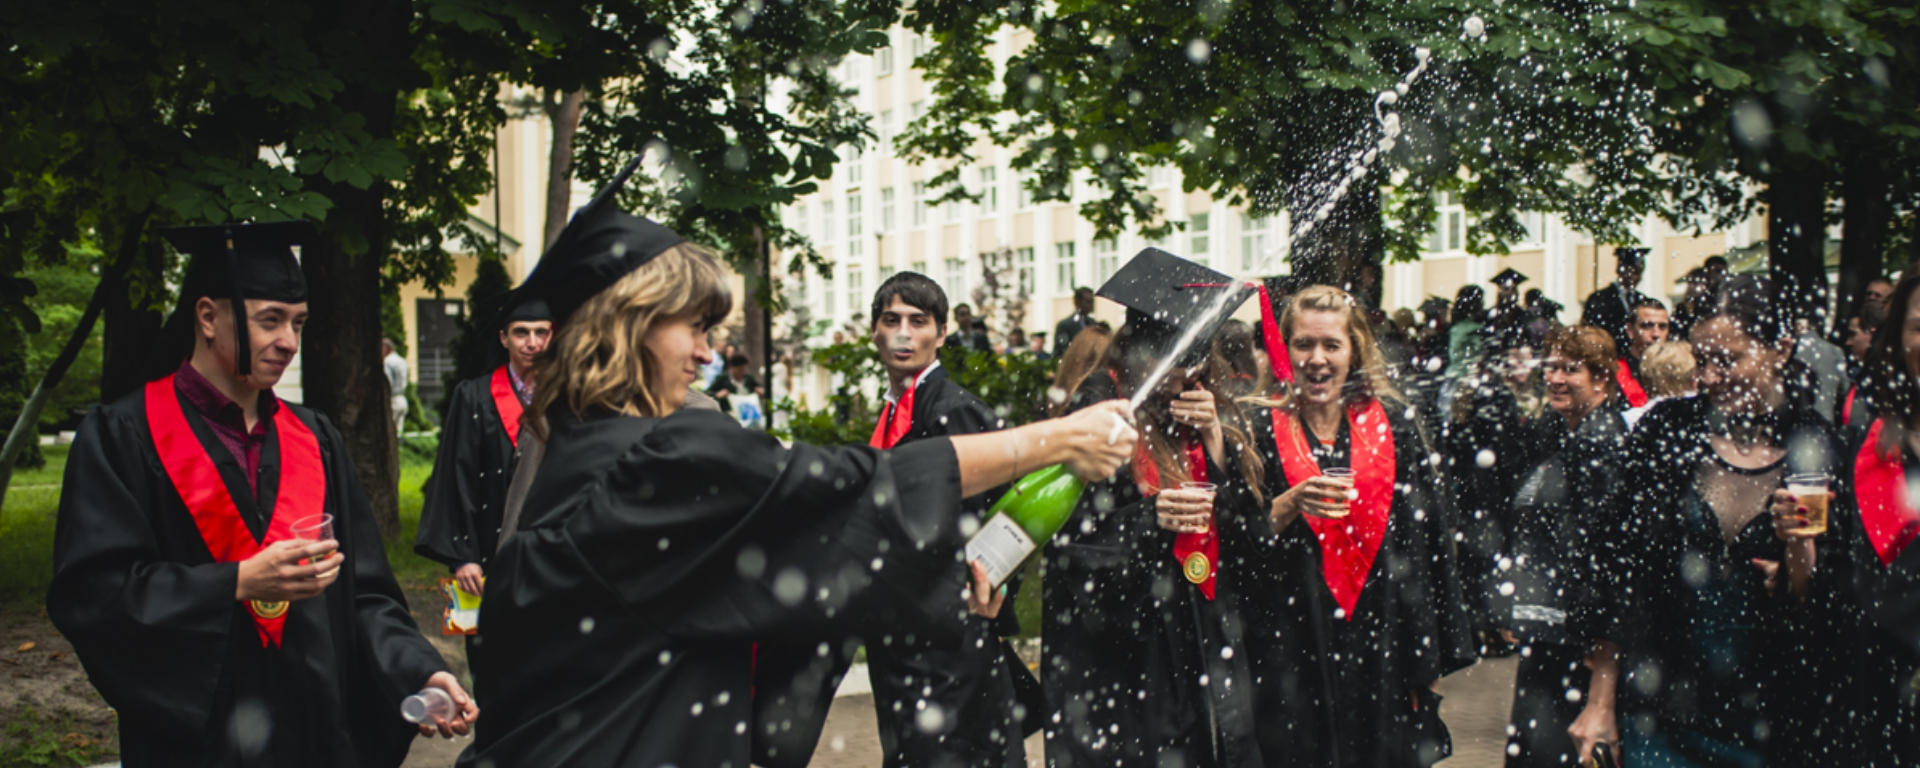 Students celebrating their graduation with a bottle of champagne. | ACI Learning